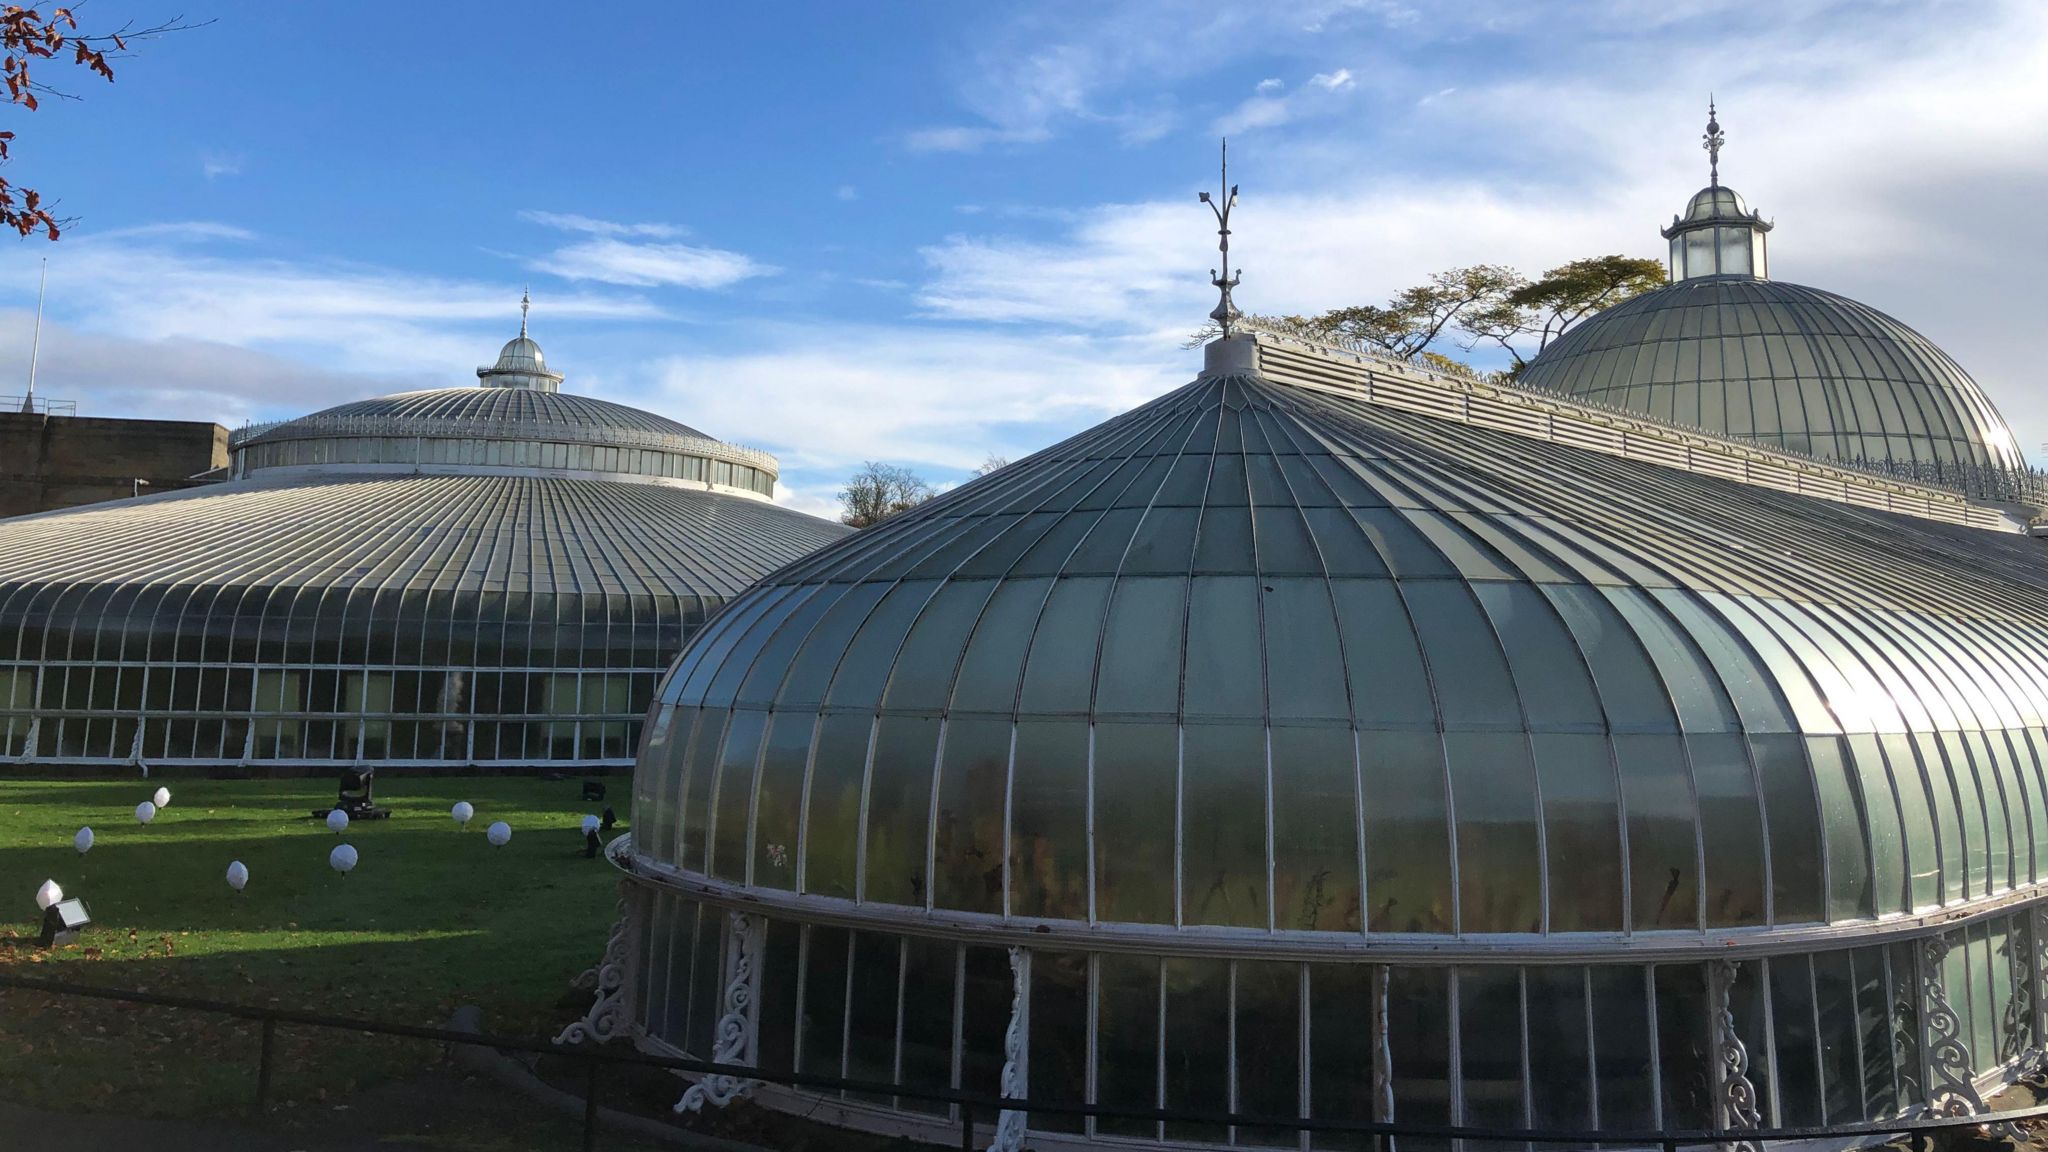 The exterior of Kibble Palace